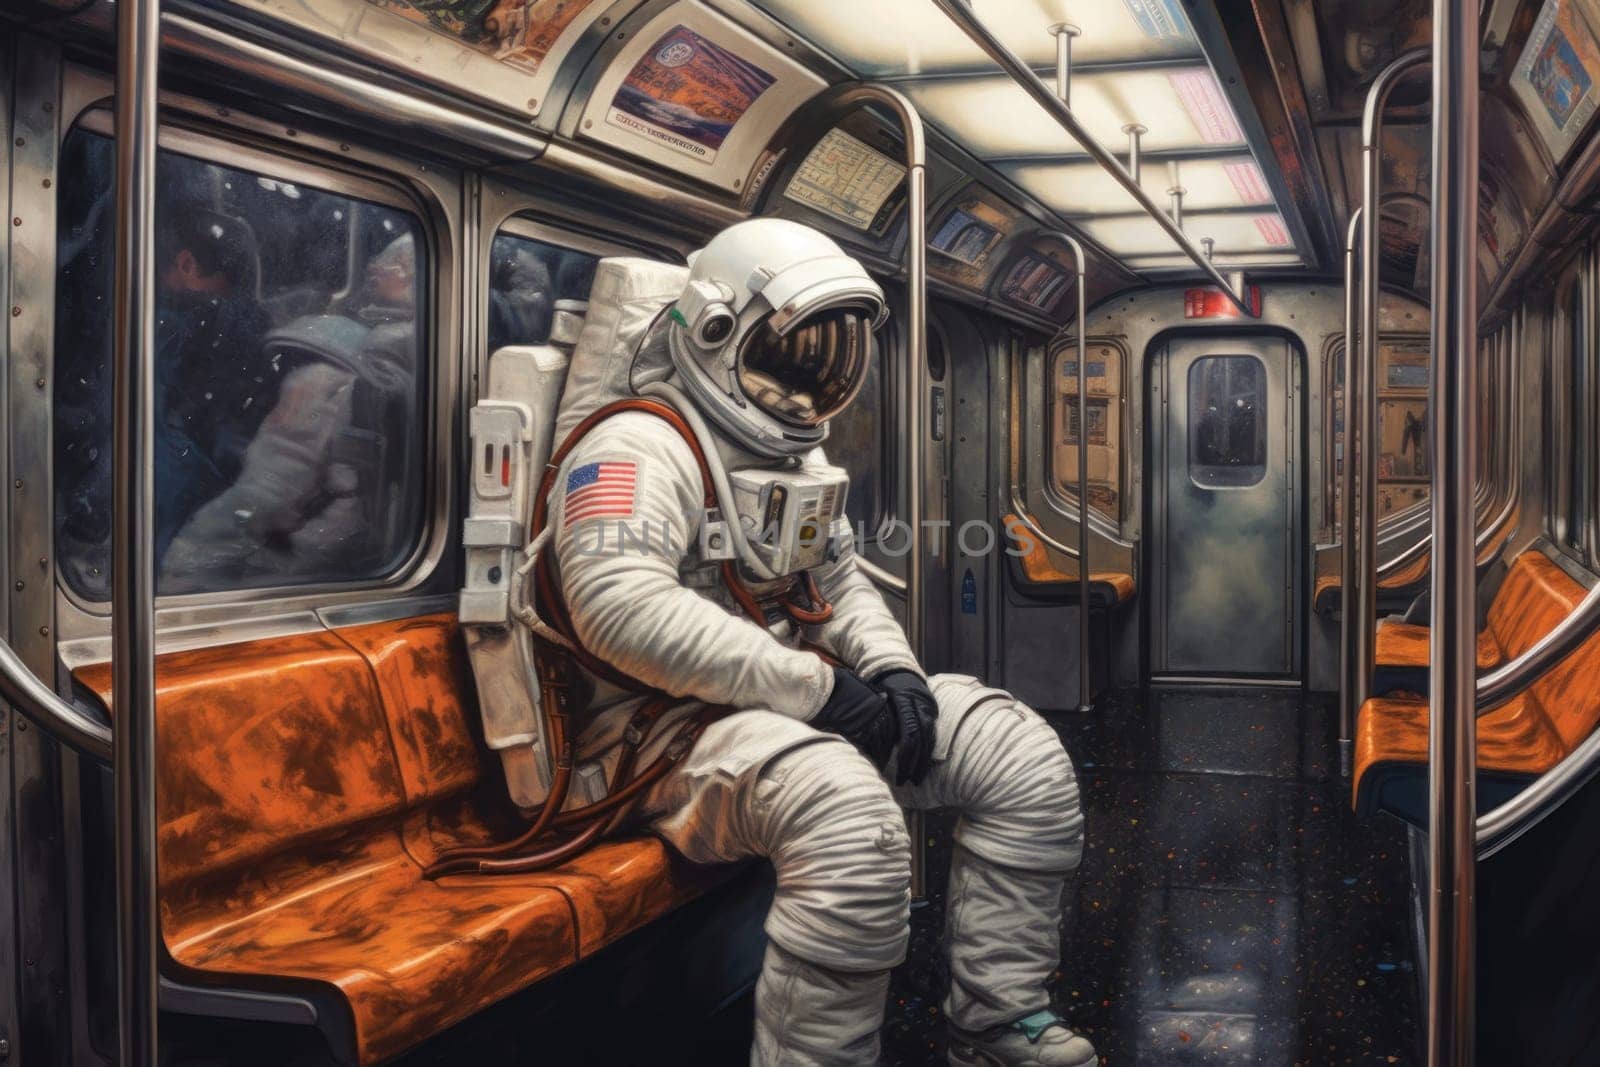 An astronaut in the subway. Astronaut in the urban environment by nijieimu